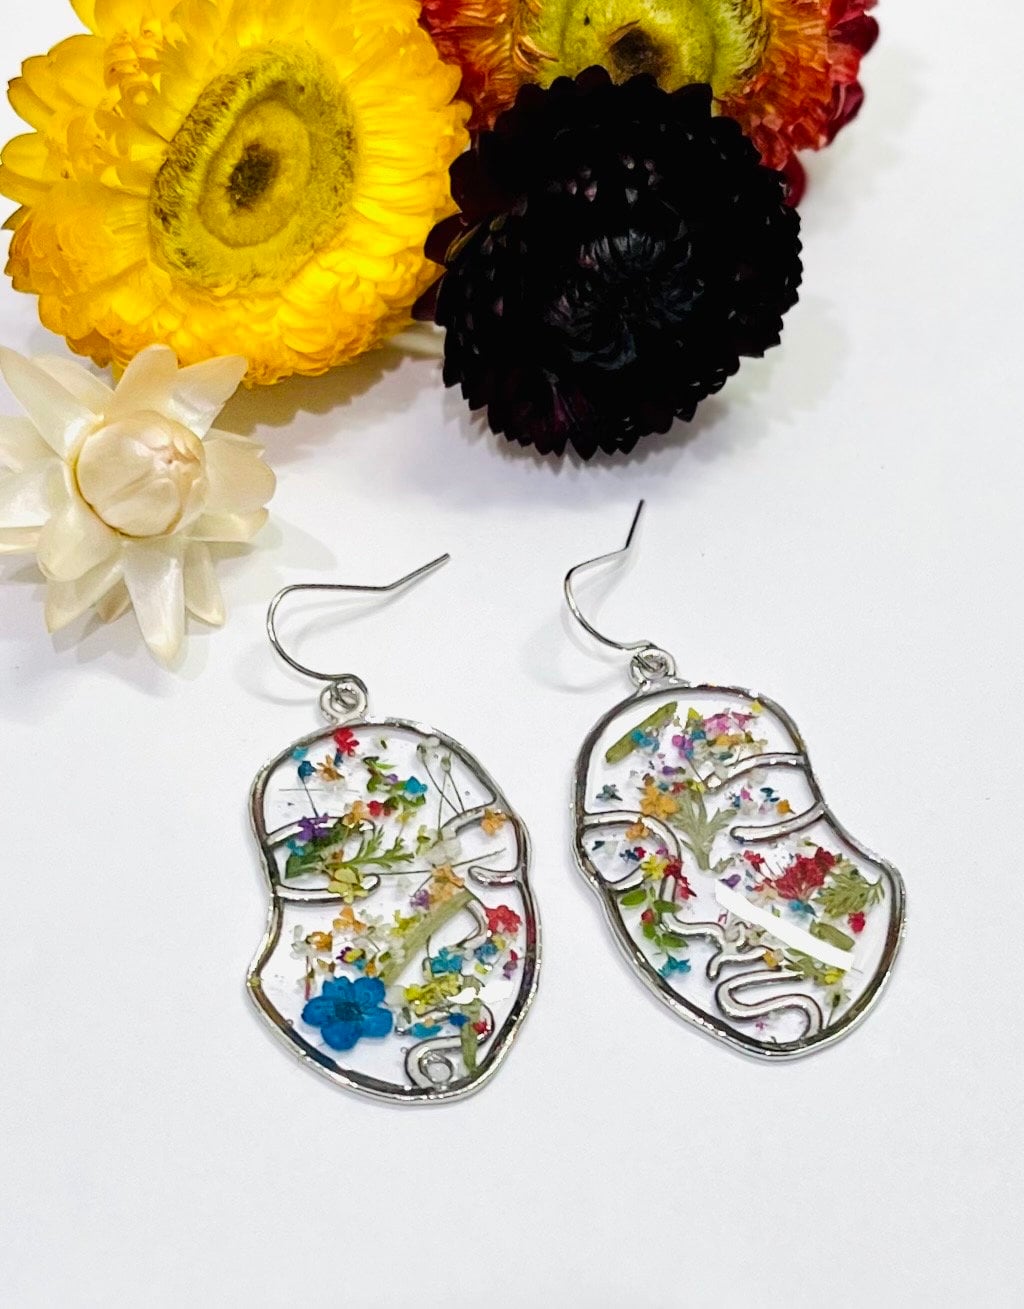 Handmade Real Pressed Flower Earrings. Abstract Rainbow Siler Face earrings. Queen Anne’s lace flowers. Rainbow. 14K white gold plated.